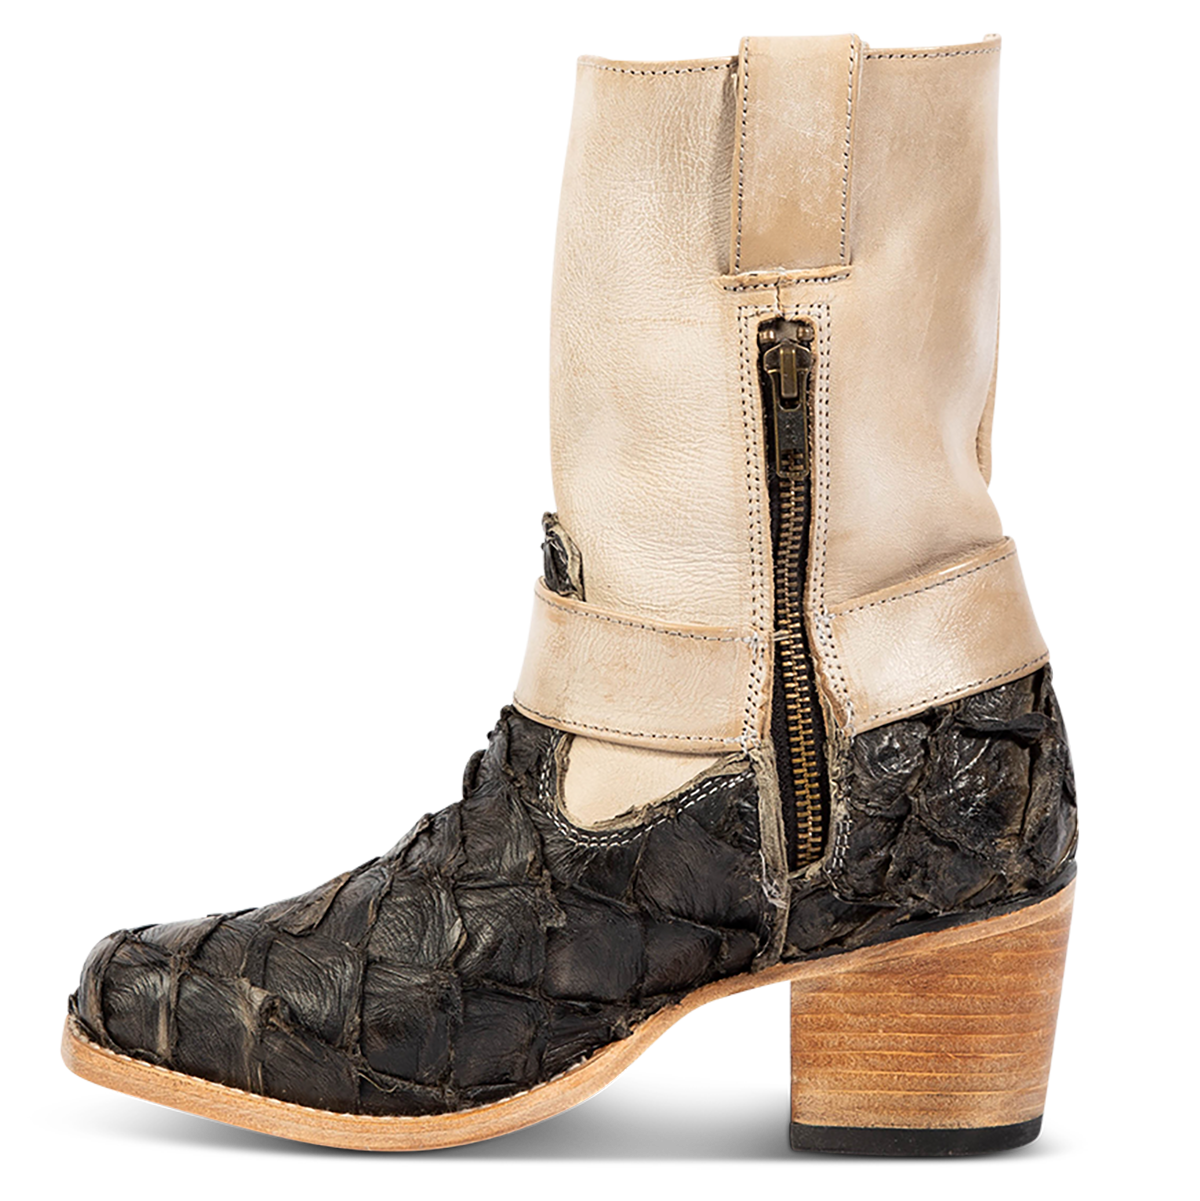 Inside view showing FREEBIRD women's Darcy beige multi fish leather boot with a studded ankle harness, leather pull straps, an inside zip closure and a square toe